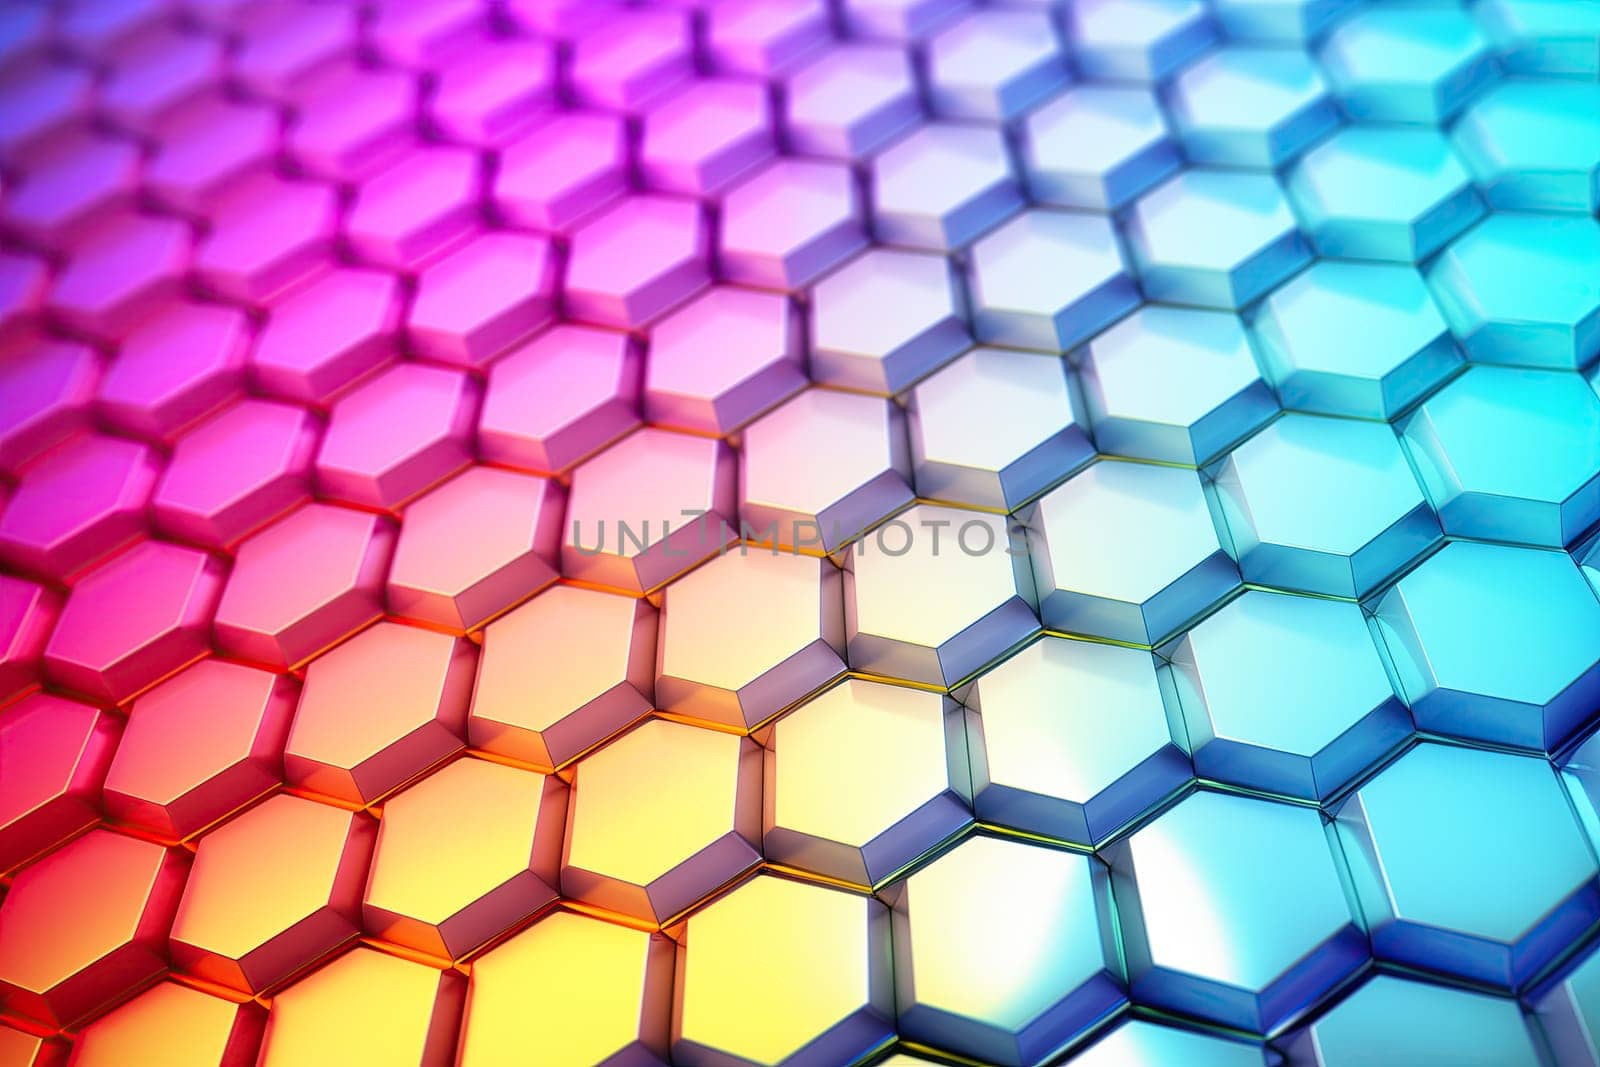 Gradient Honeycomb Convex Pattern background by dimol